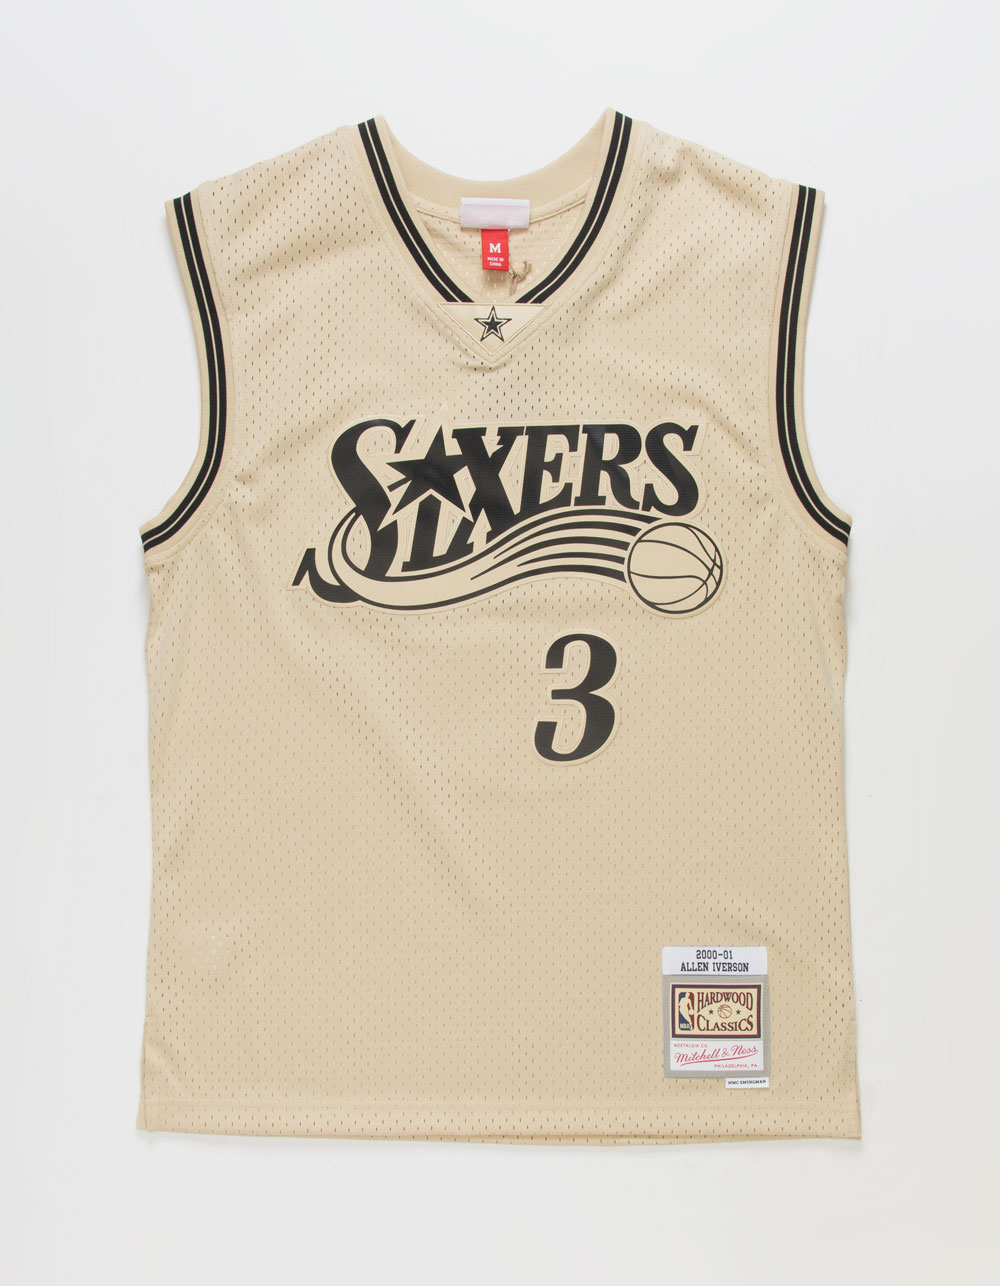 Nba Sports Jersey Dresses Outlet, SAVE 52%.